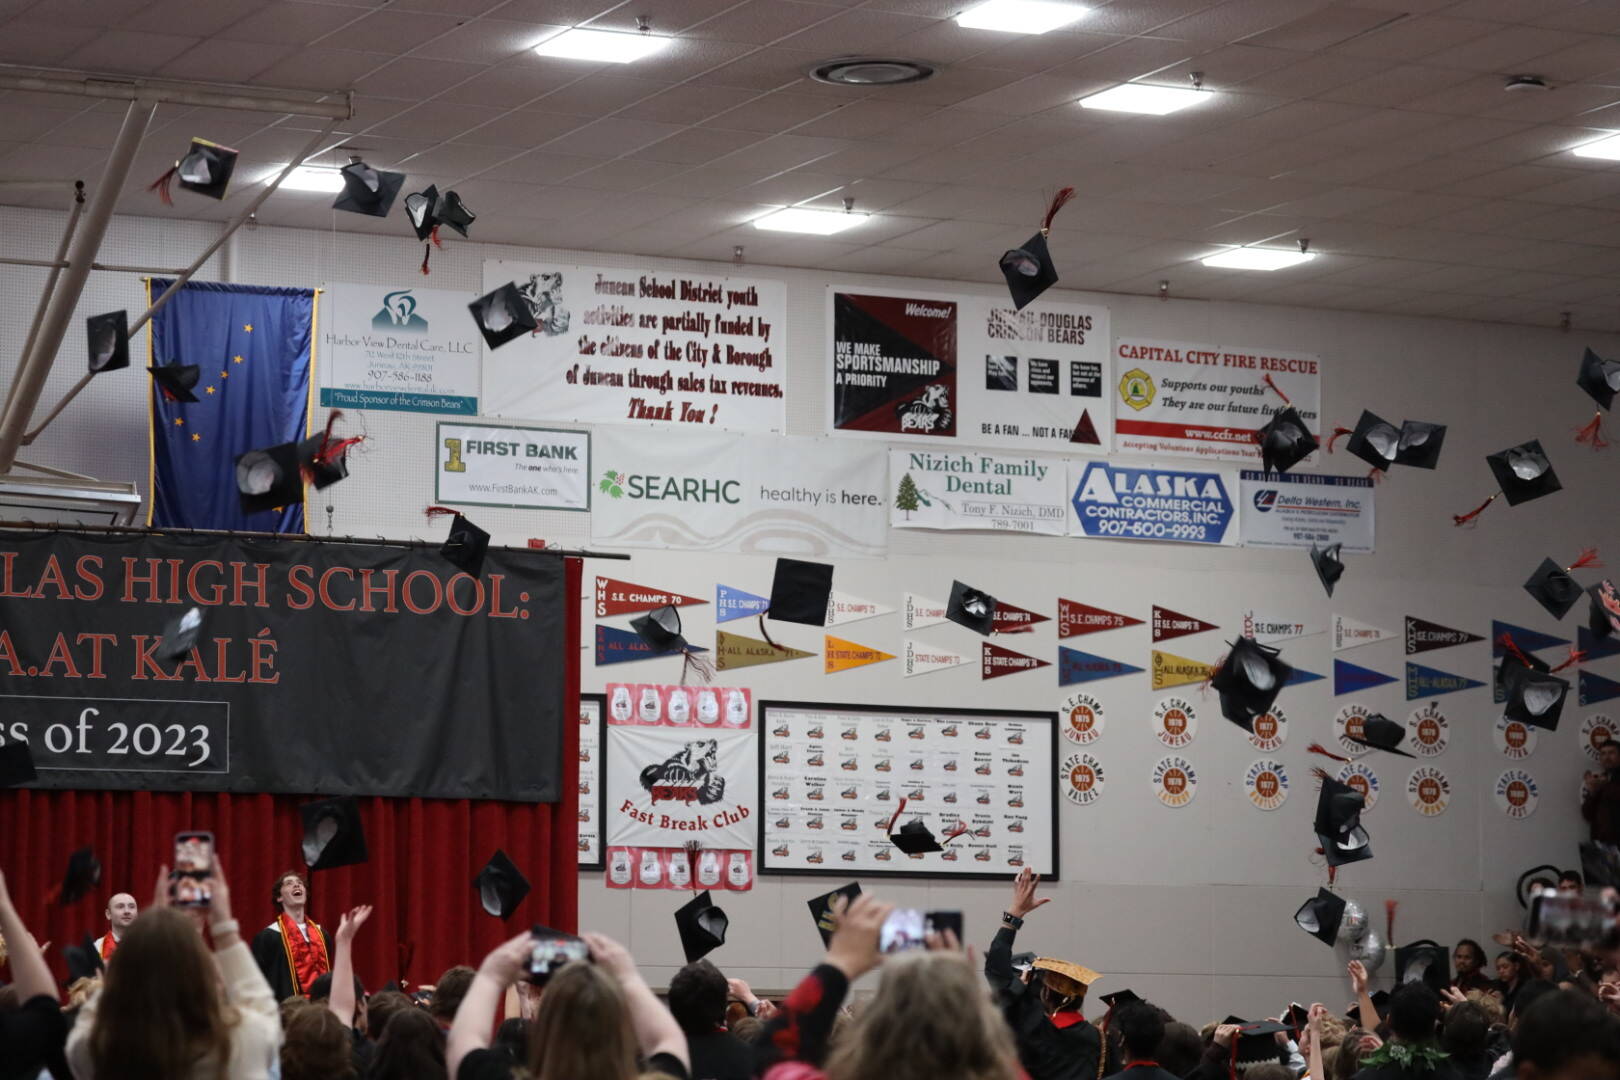 About 140 students at Juneau-Douglas High School: Yadaa.at Kalé toss their caps in the air after receiving the diplomas during Sunday’s graduation ceremony. (Clarise Larson / Juneau Empire)